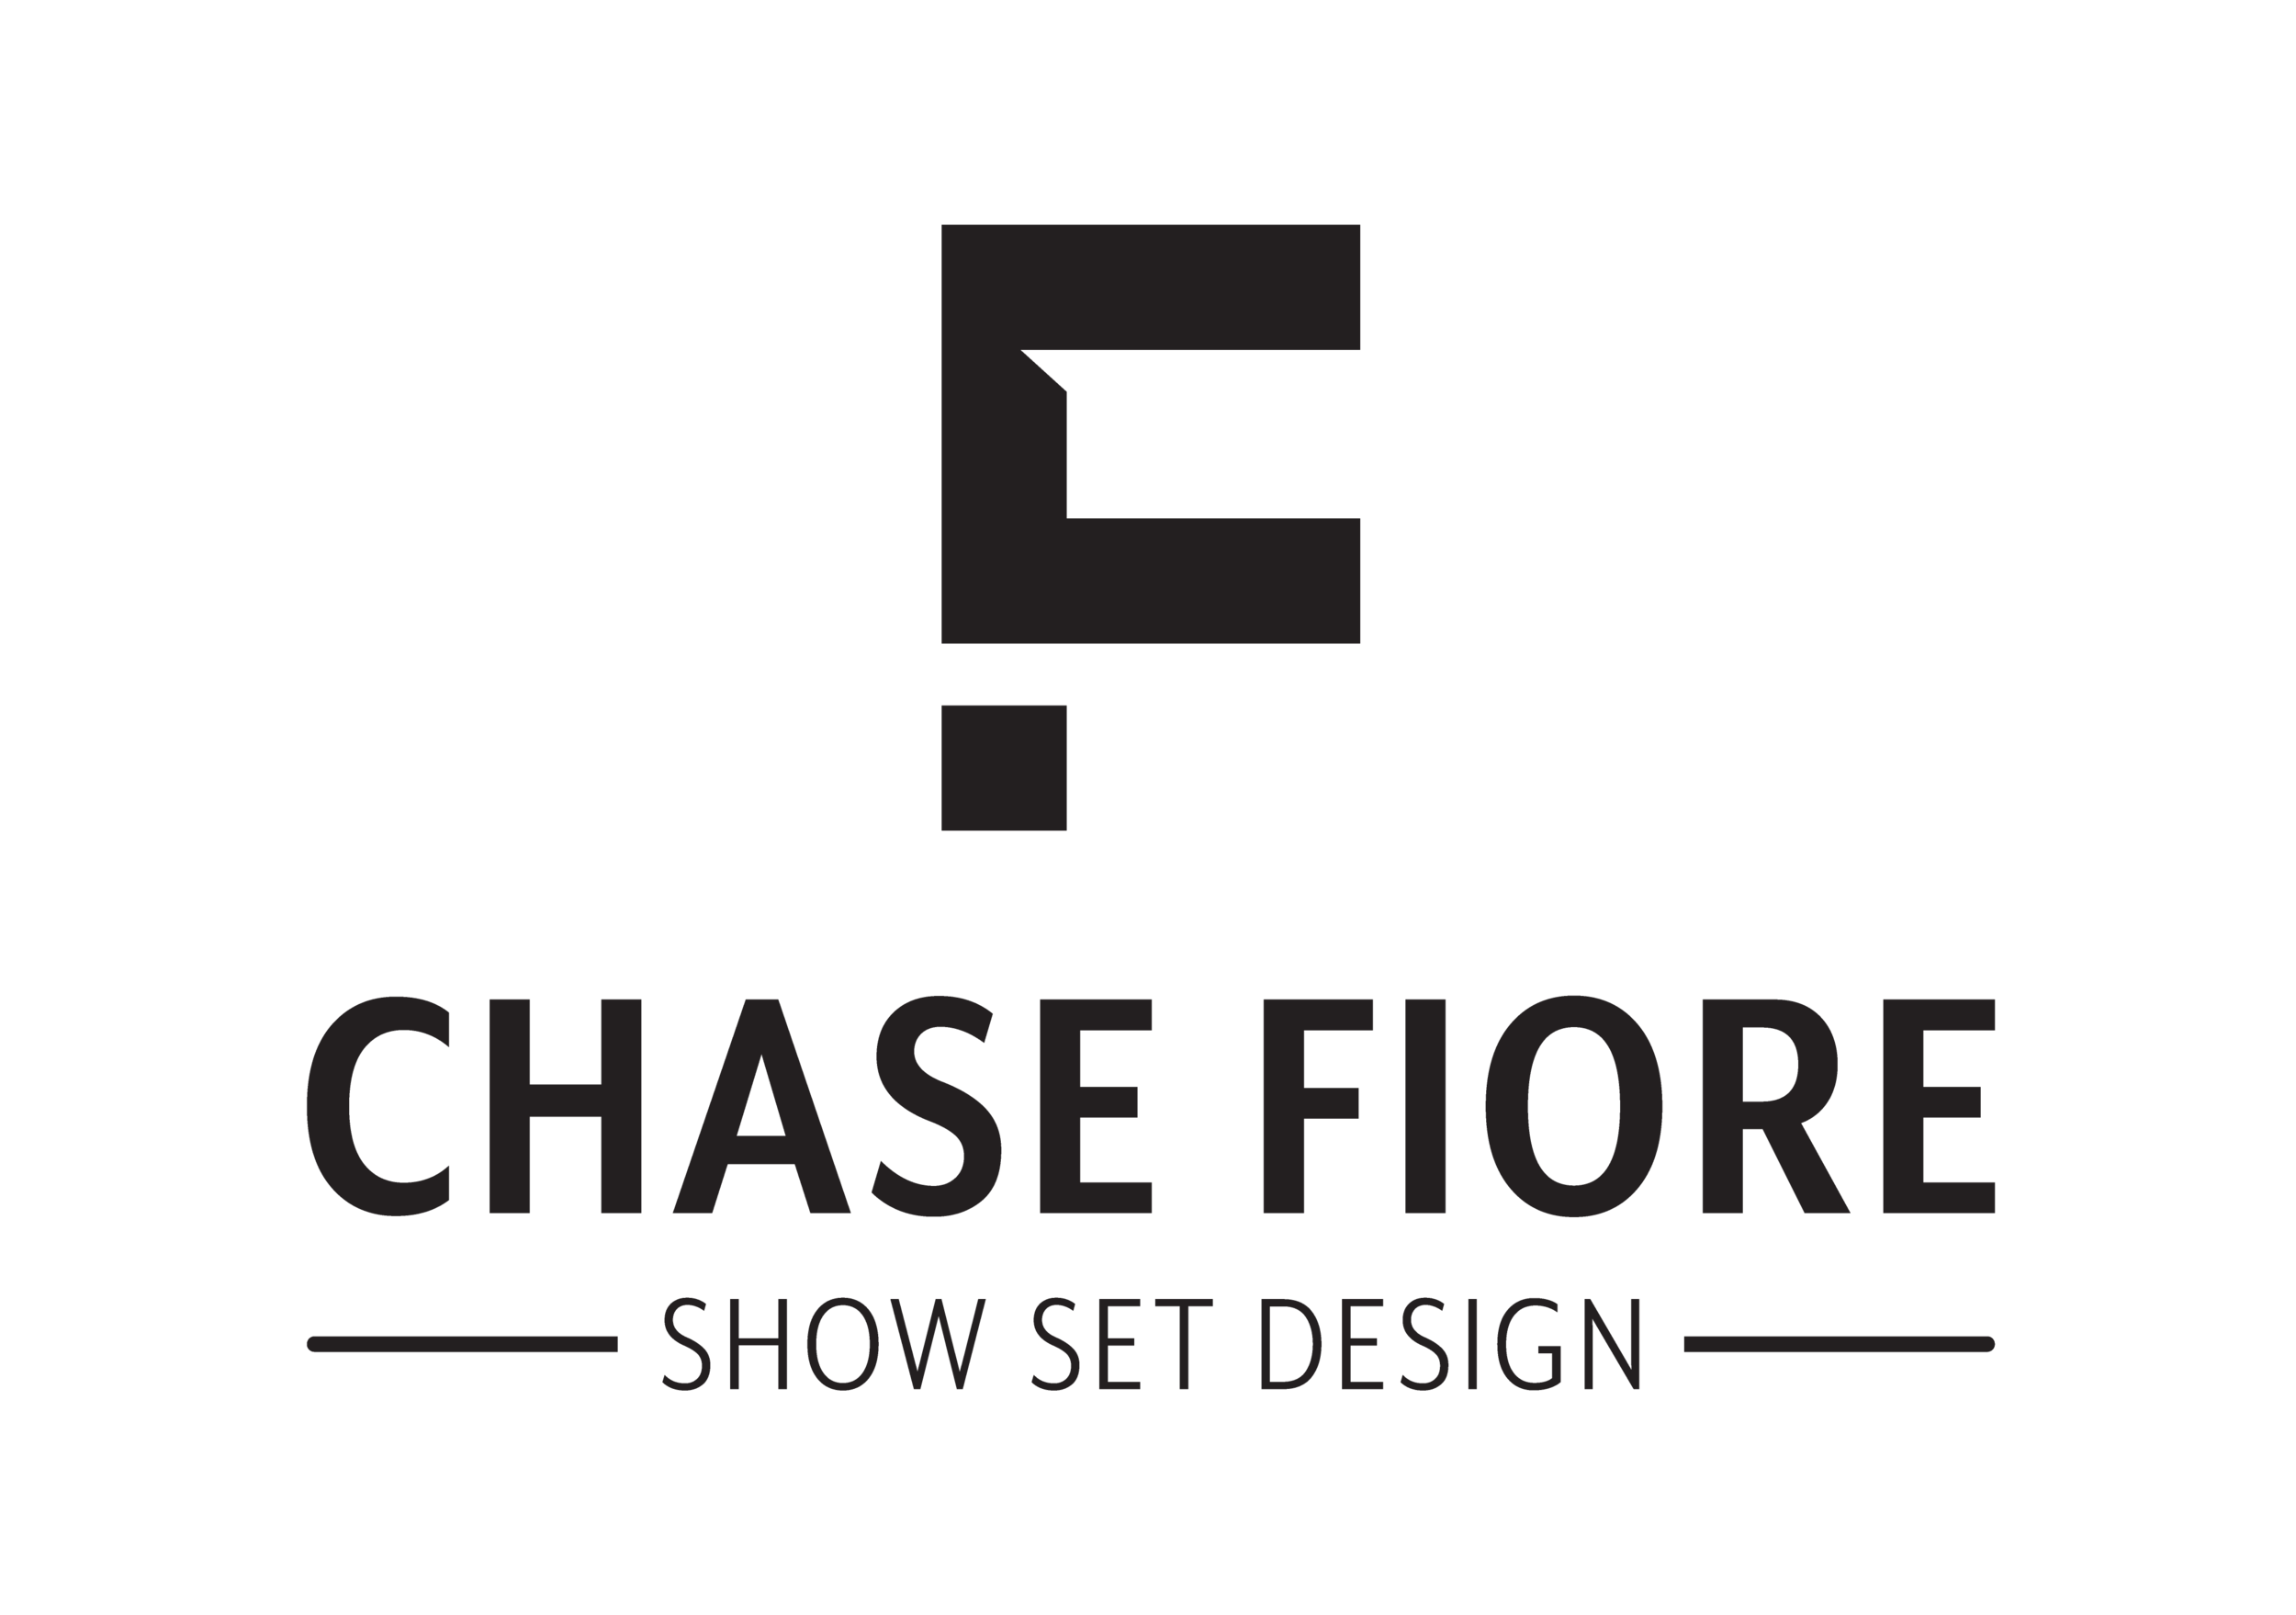 Chase Fiore